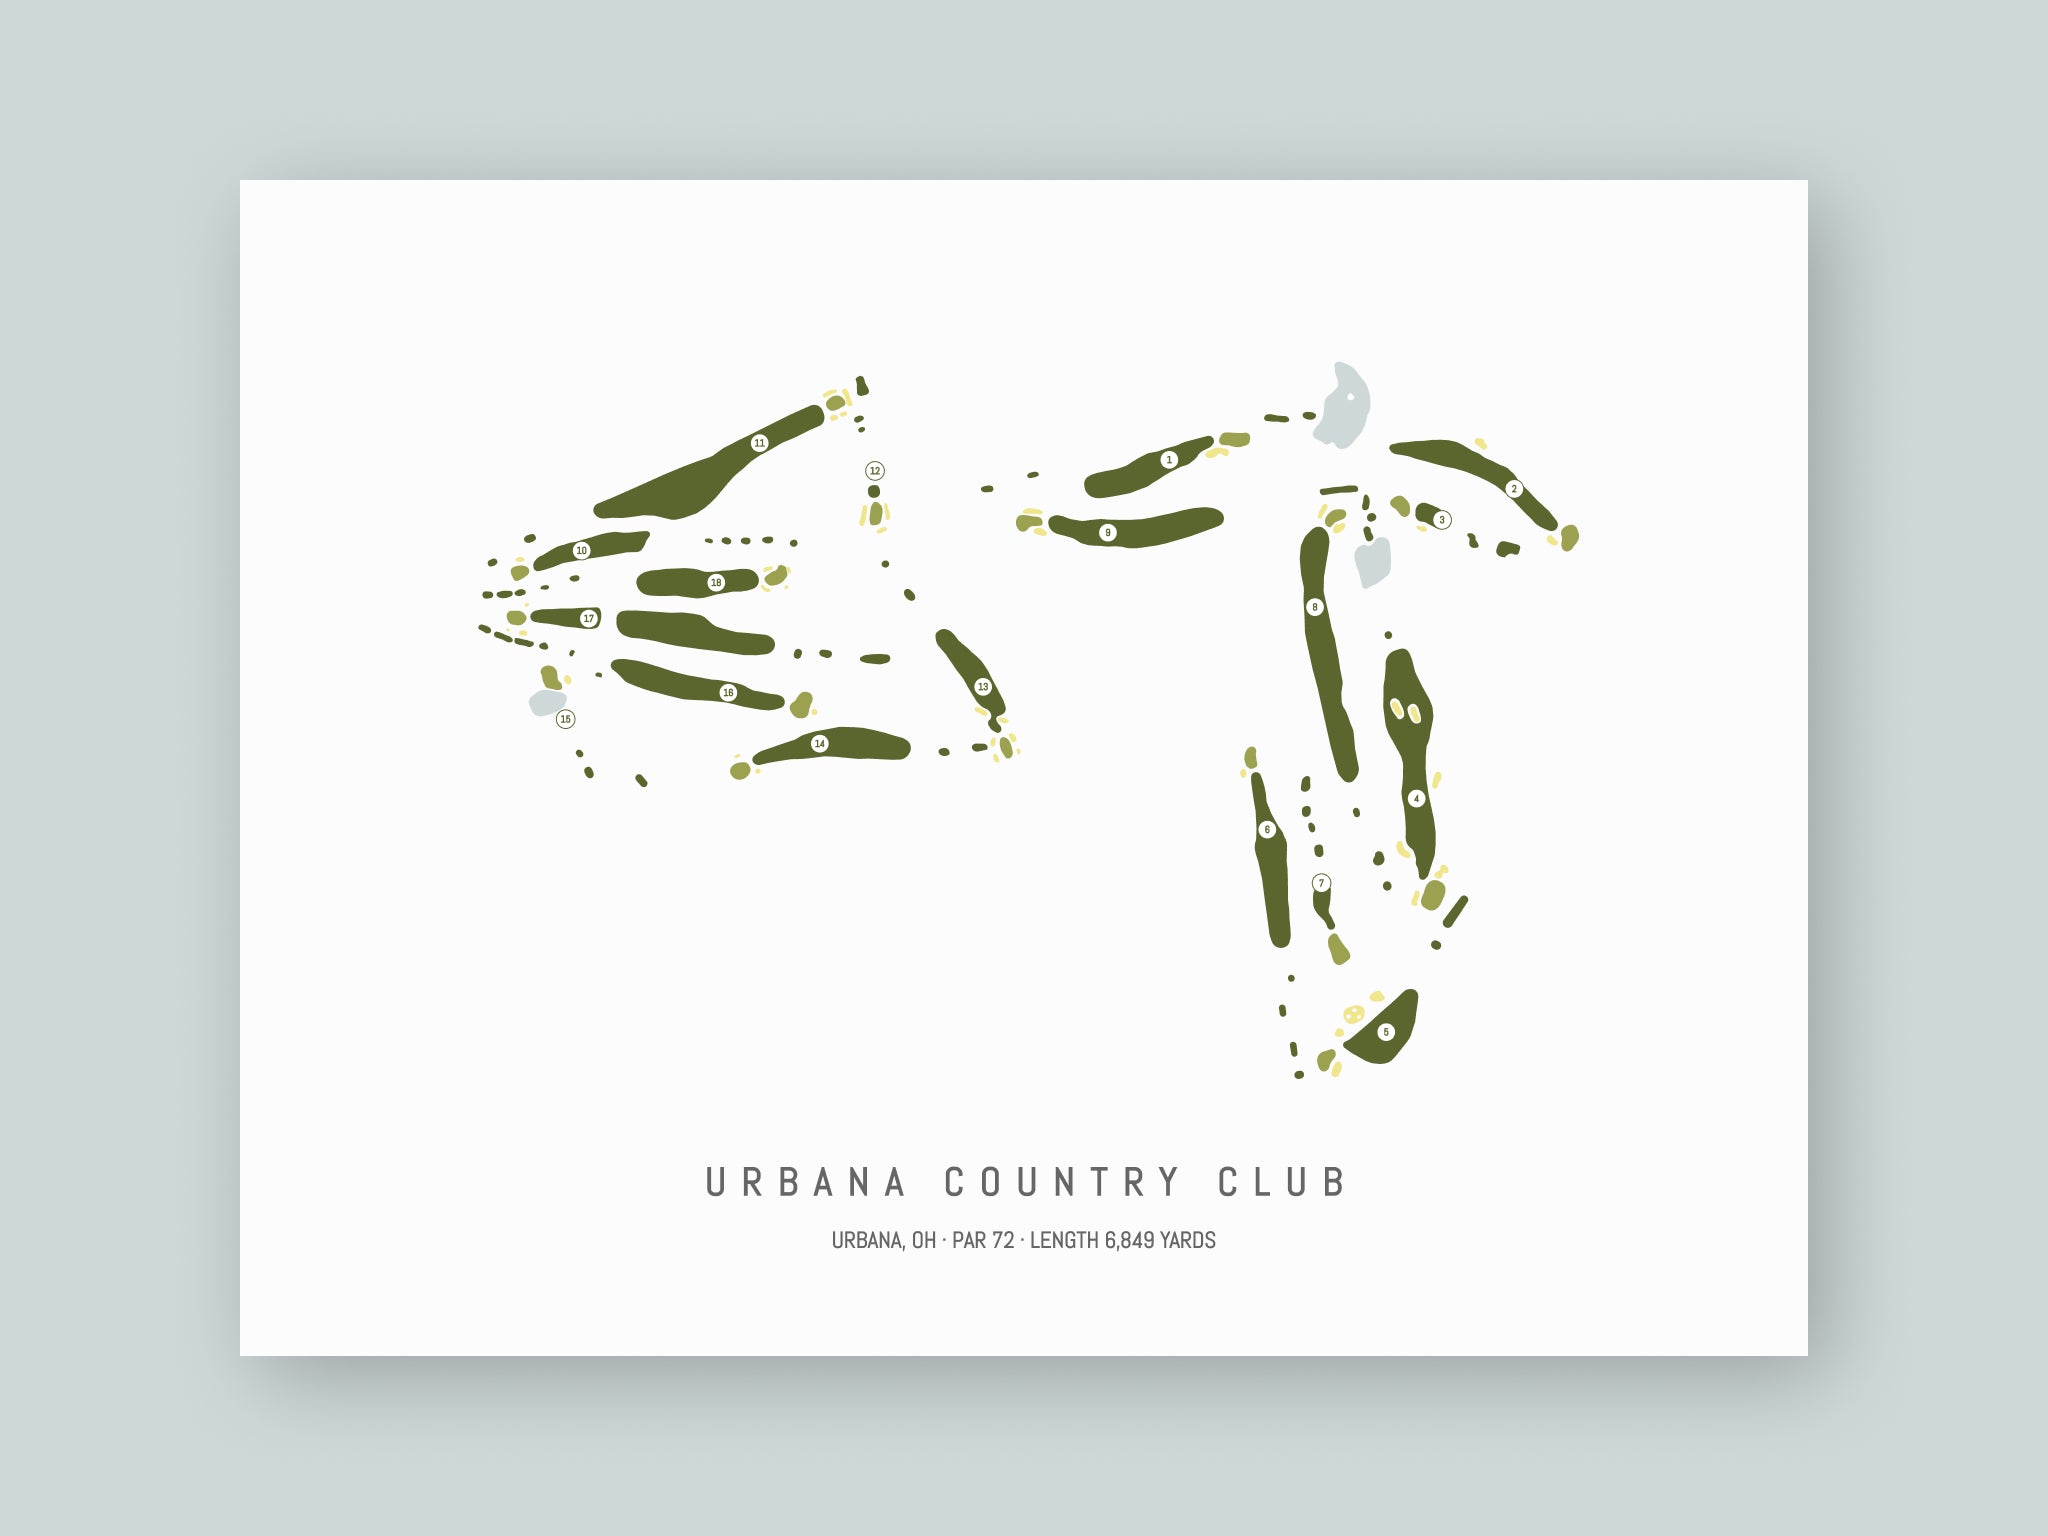 Urbana-Country-Club-OH--Unframed-24x18-With-Hole-Numbers